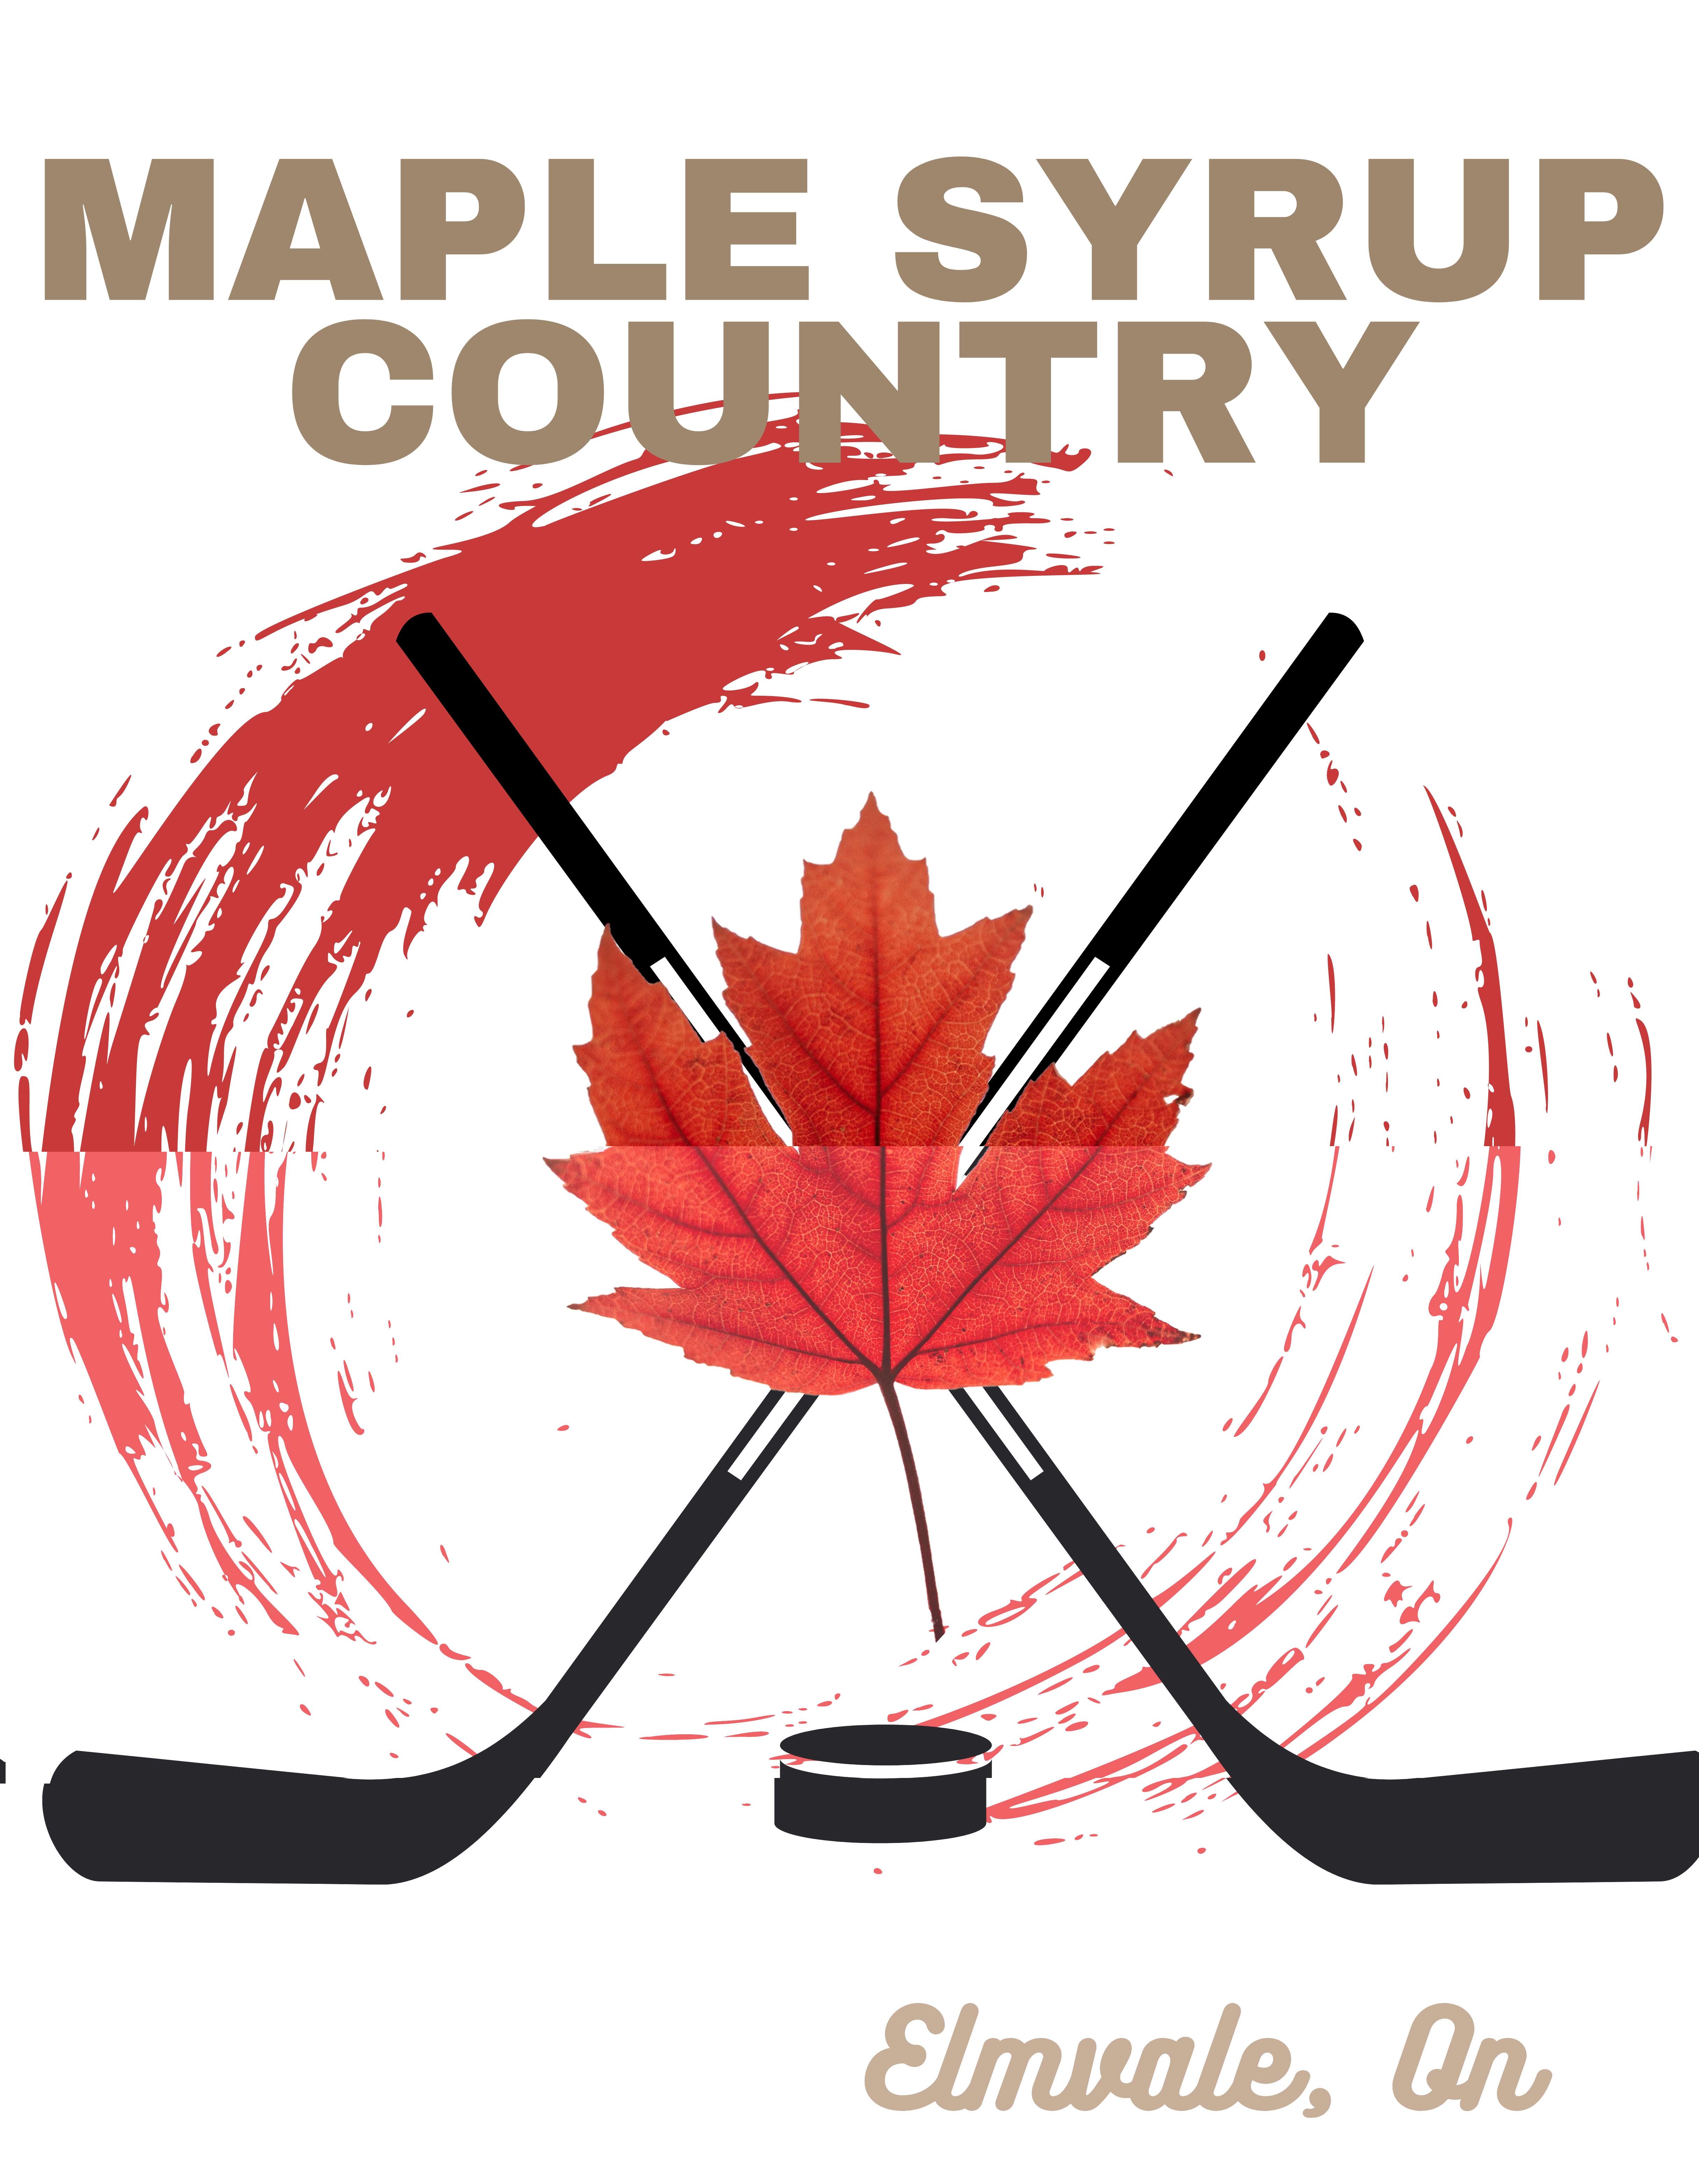 MaPle_Syrop_Country.jpg